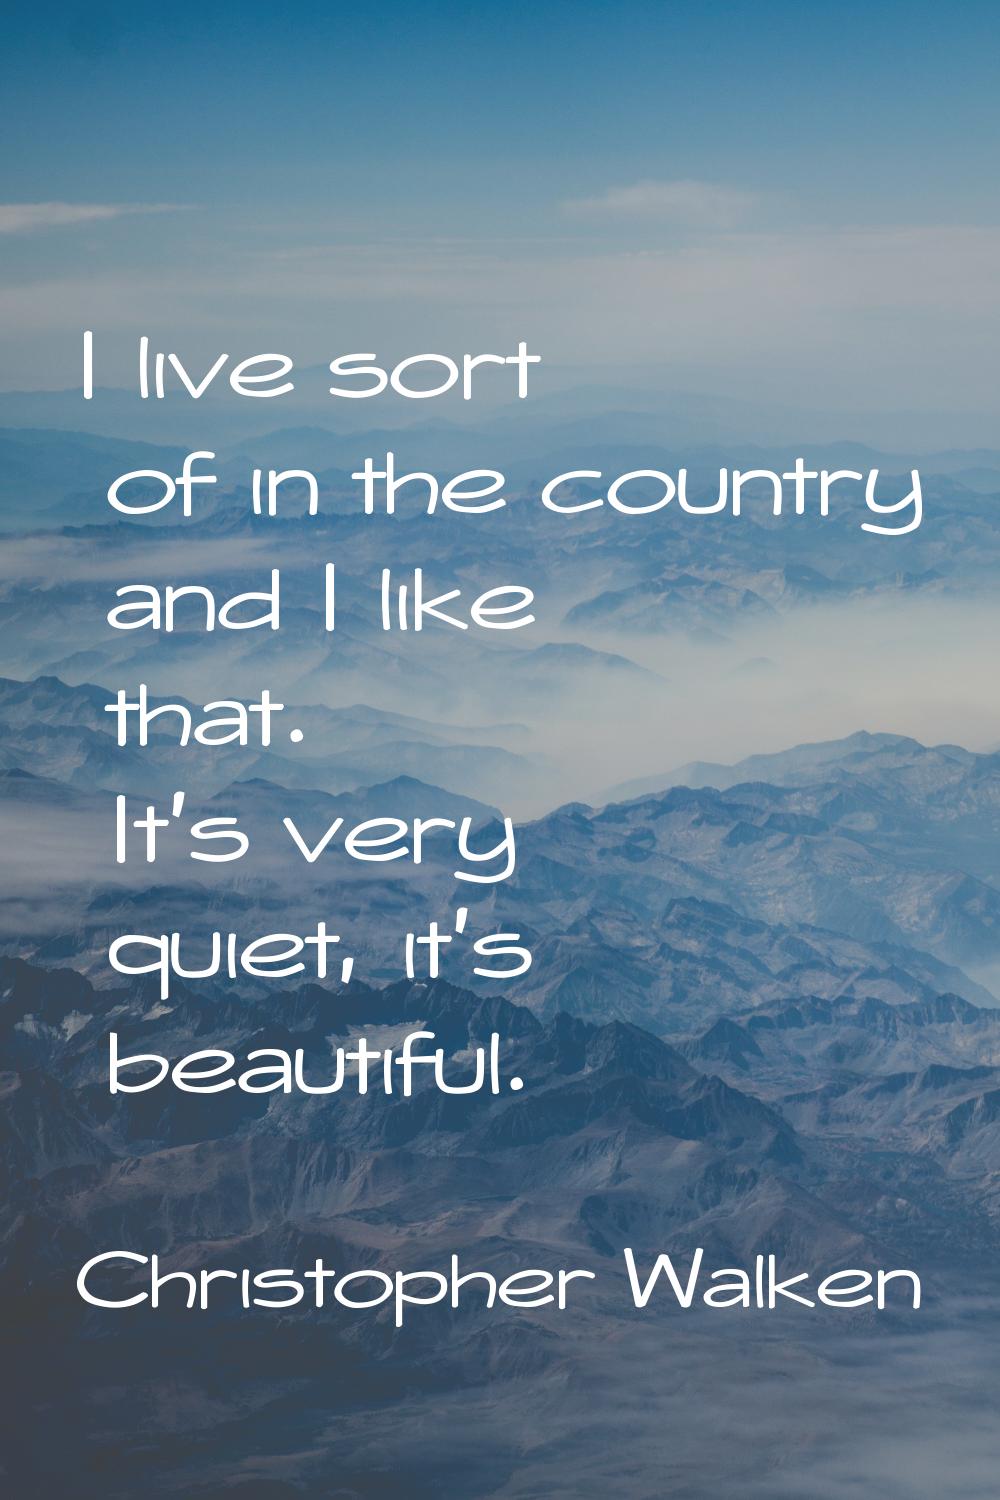 I live sort of in the country and I like that. It's very quiet, it's beautiful.